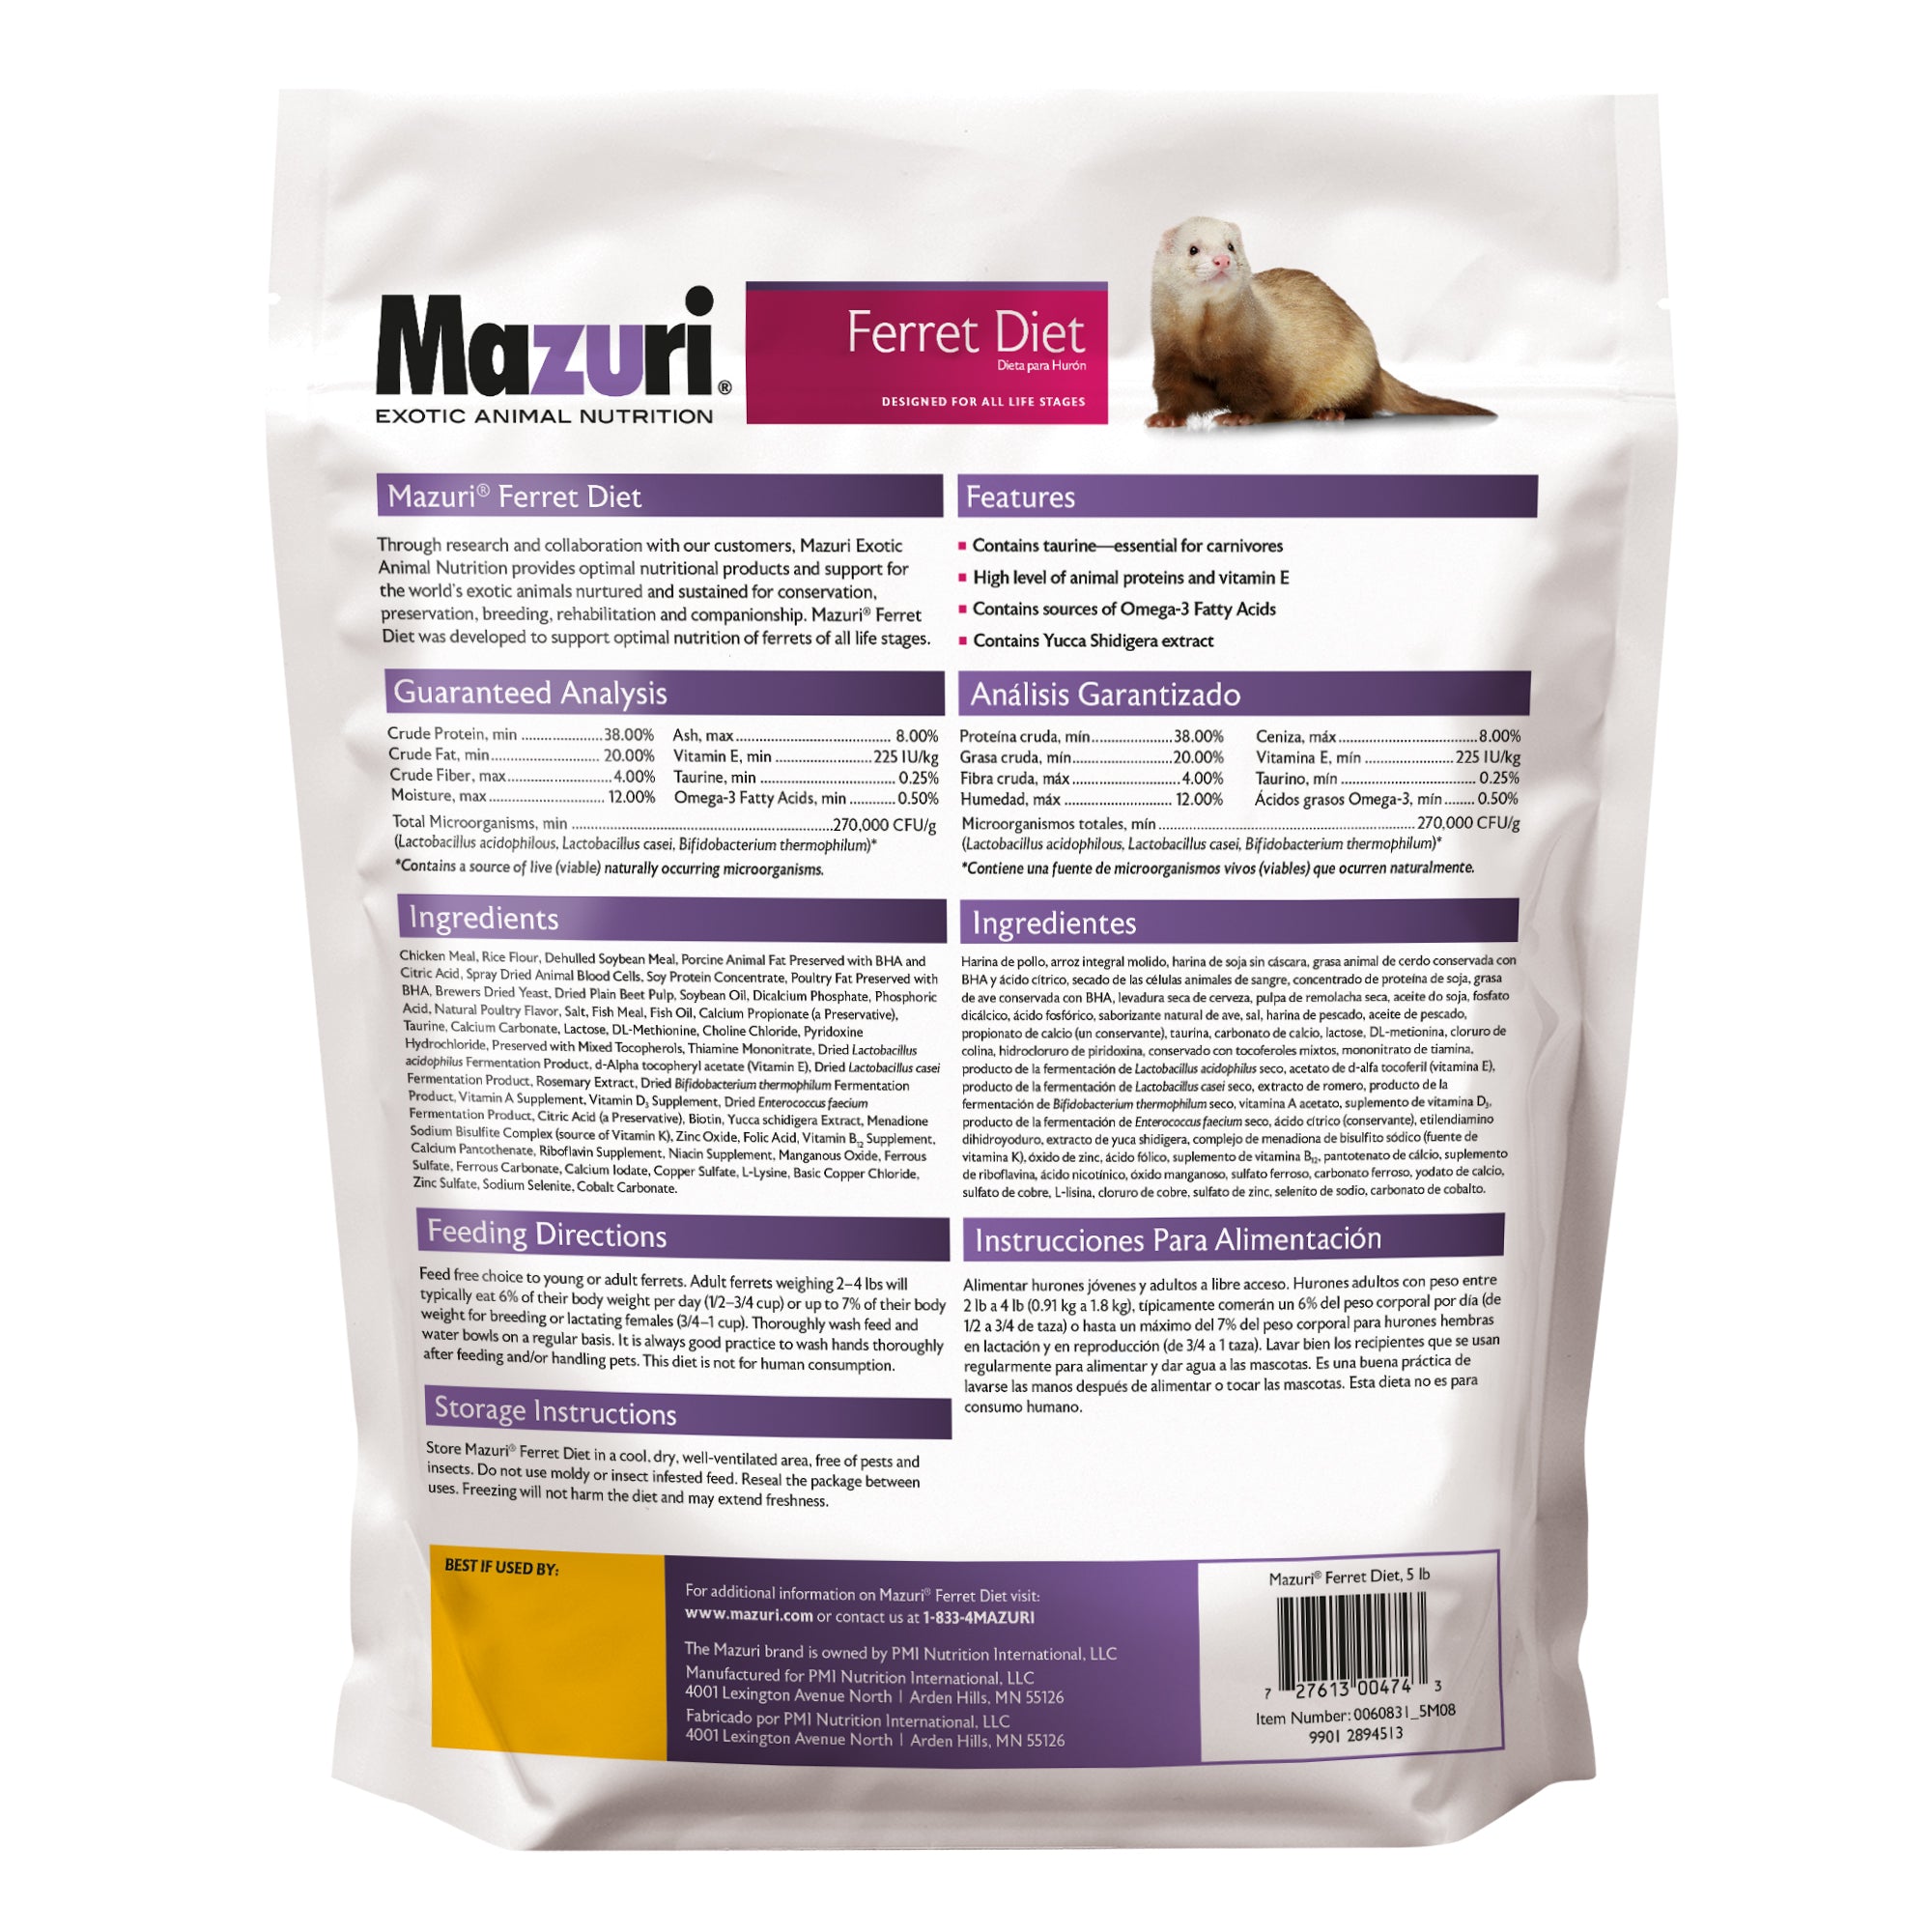 Ferret Diet 5 pound bag back with product information